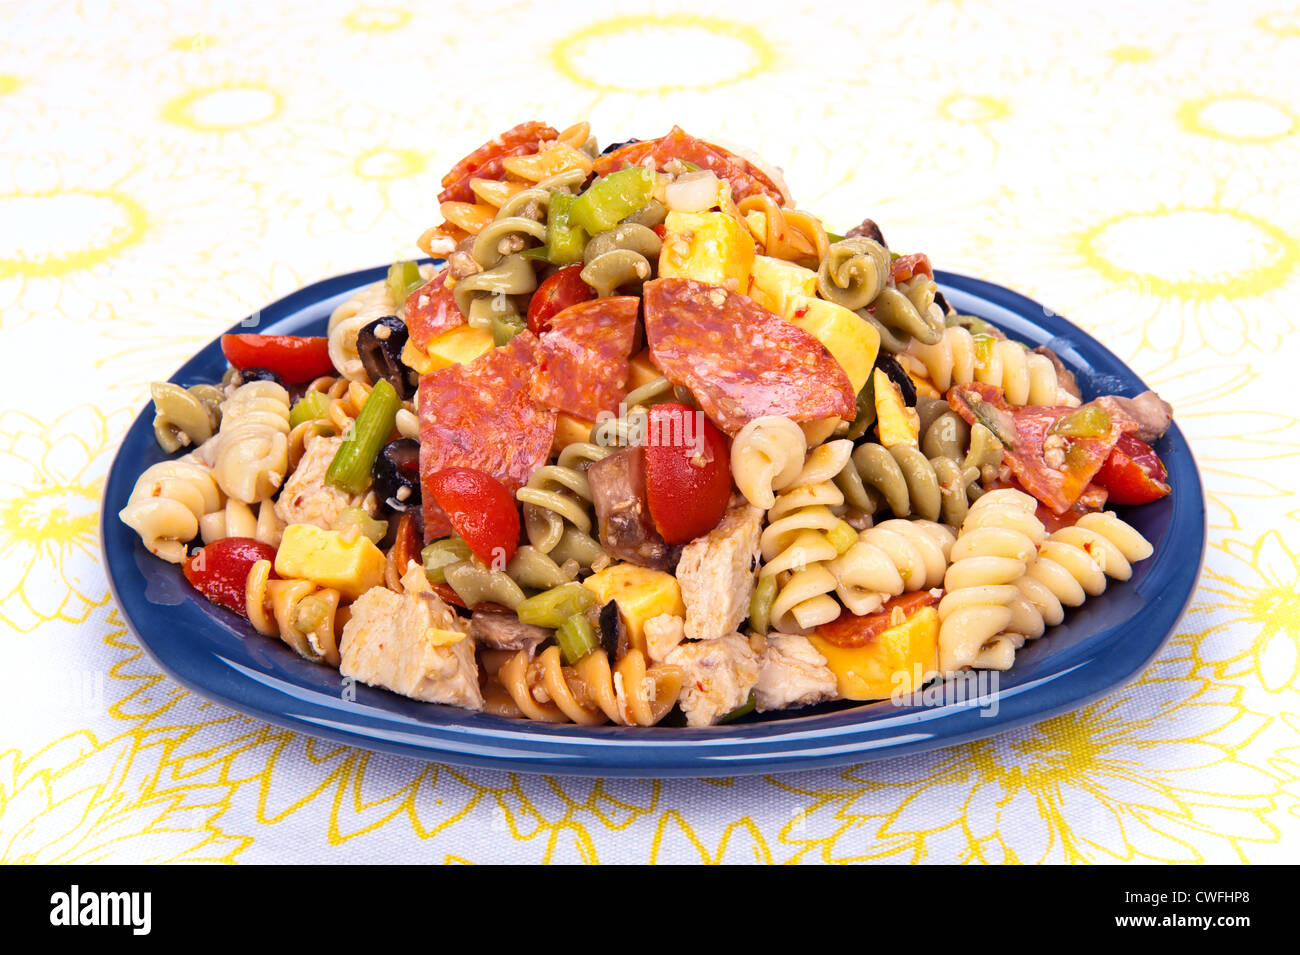 A plate of fresh pasta with pepperoni, macaroni, chicken, cheddar cheese and assorted vegetables Stock Photo